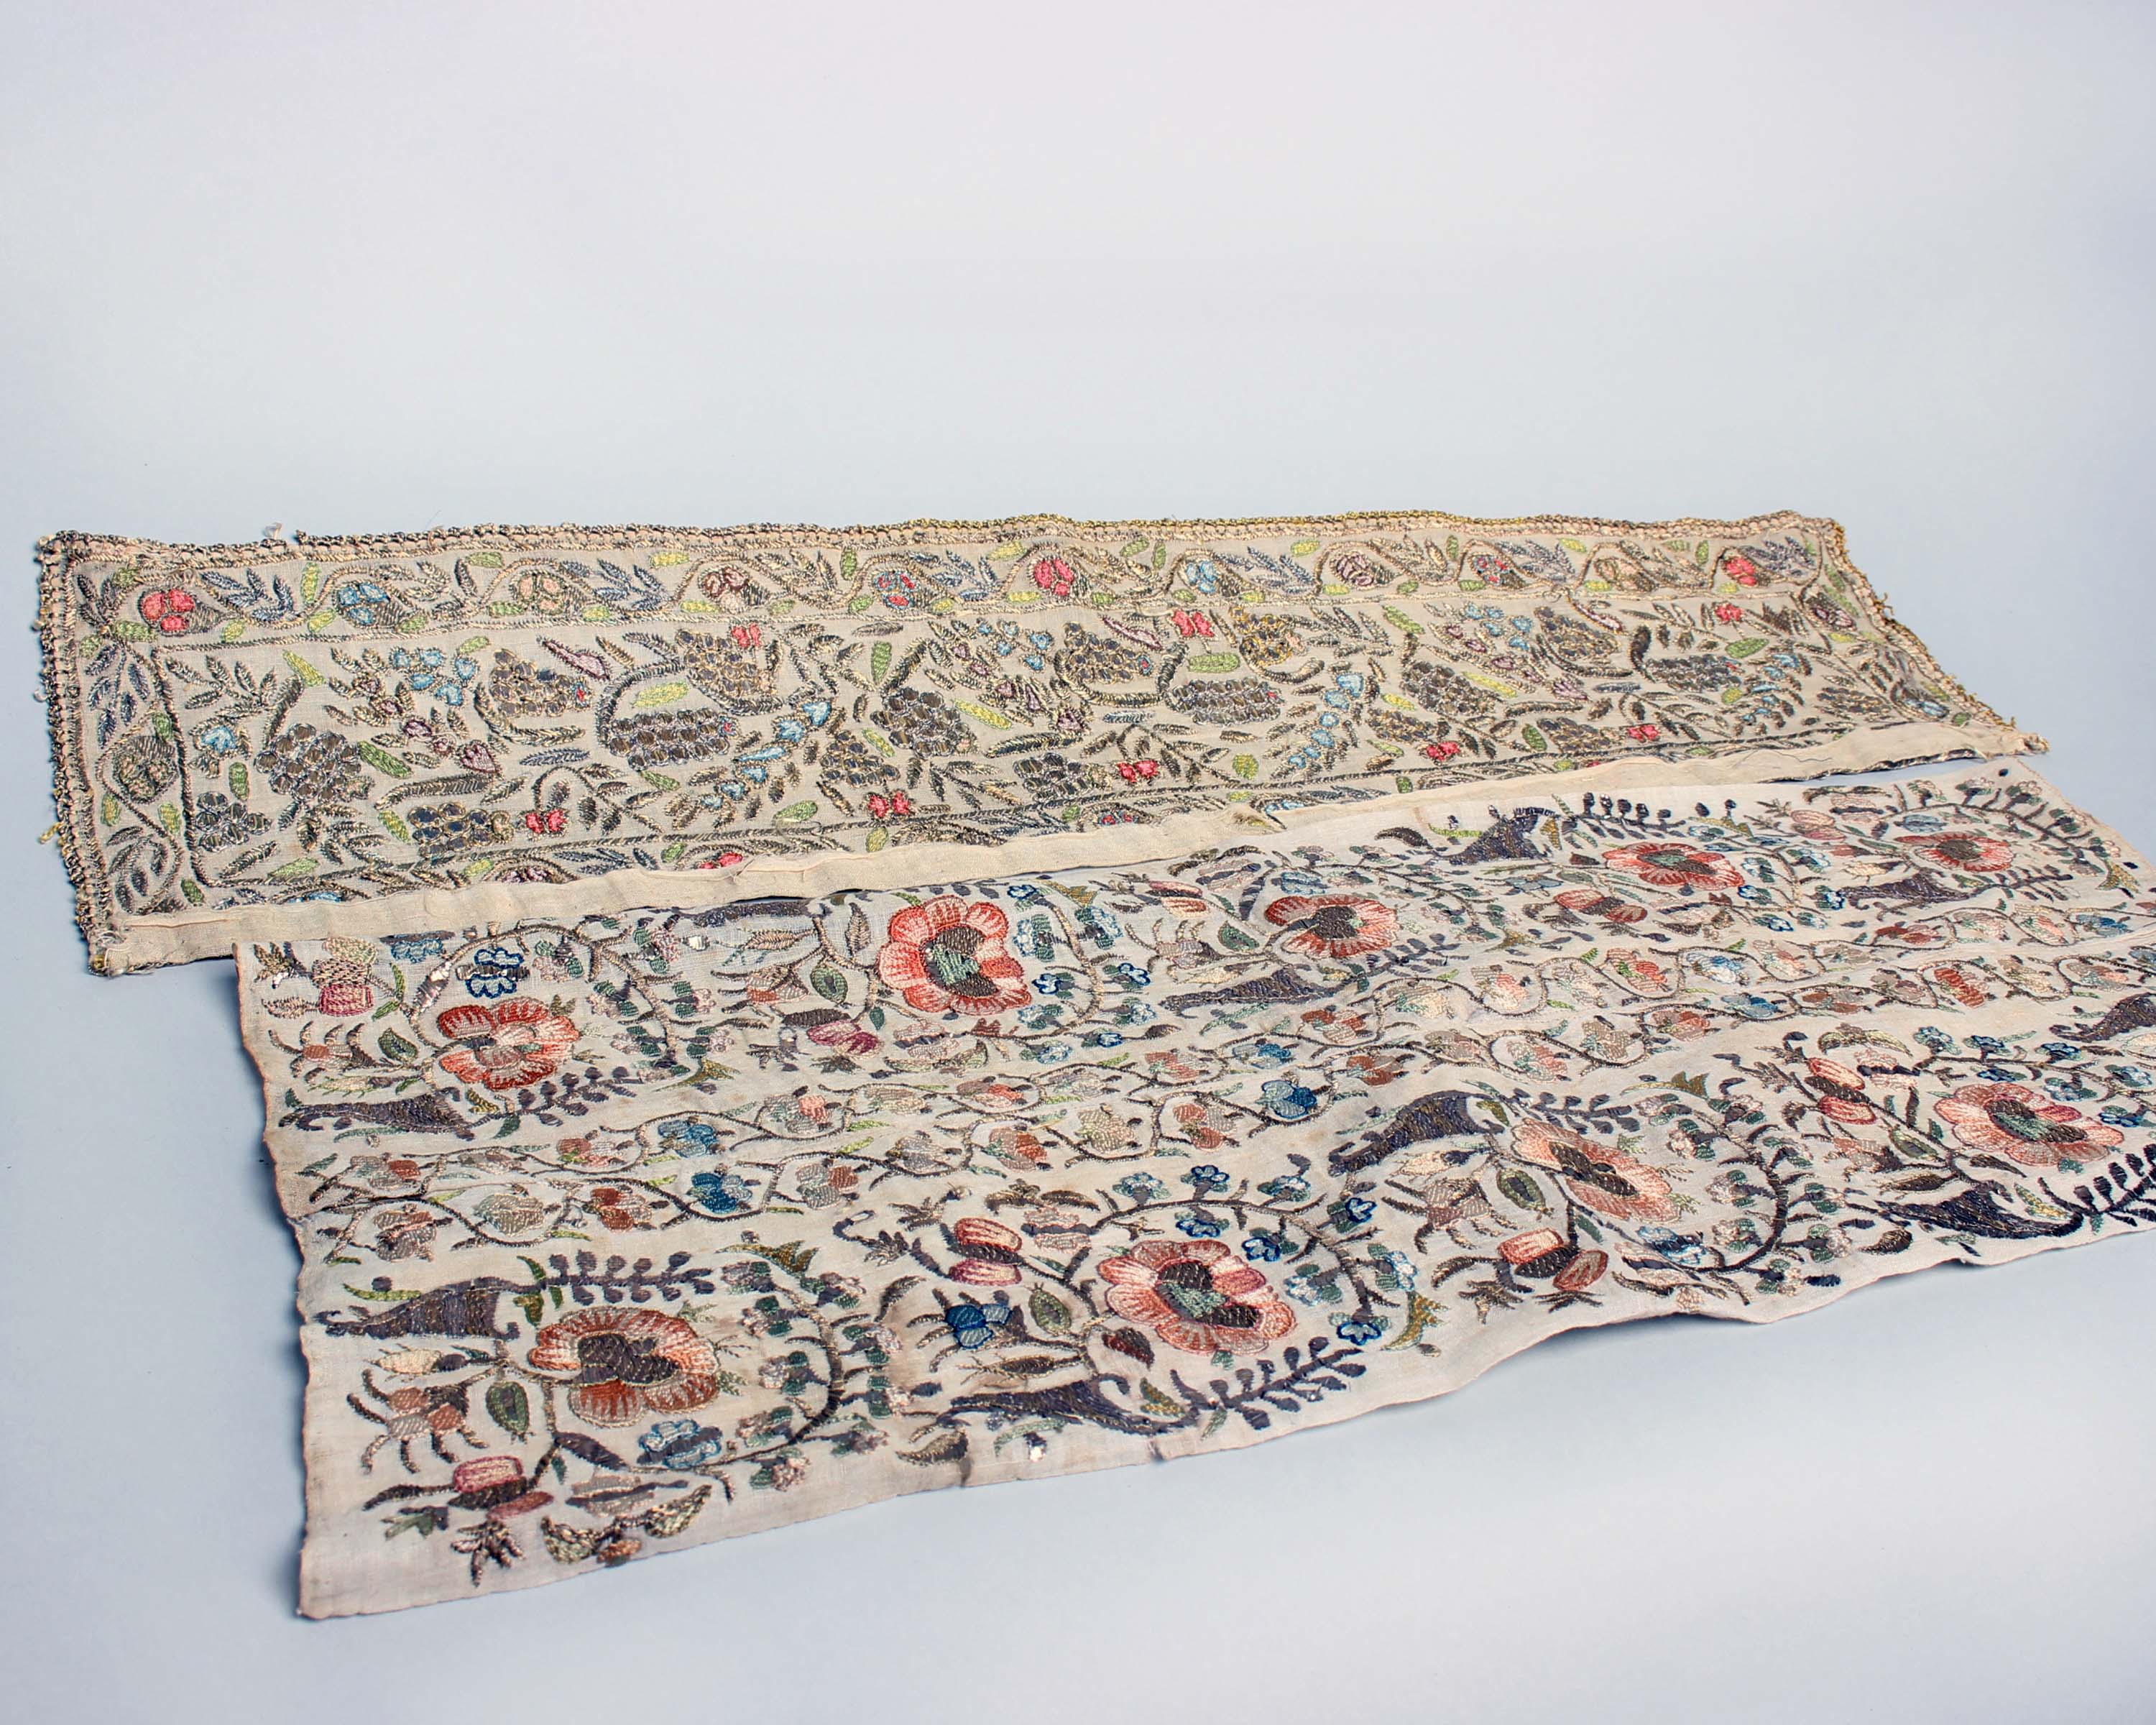 A Turkish late Ottoman 19th Century panel (a pair of towel ends sewn together) with an embroidered